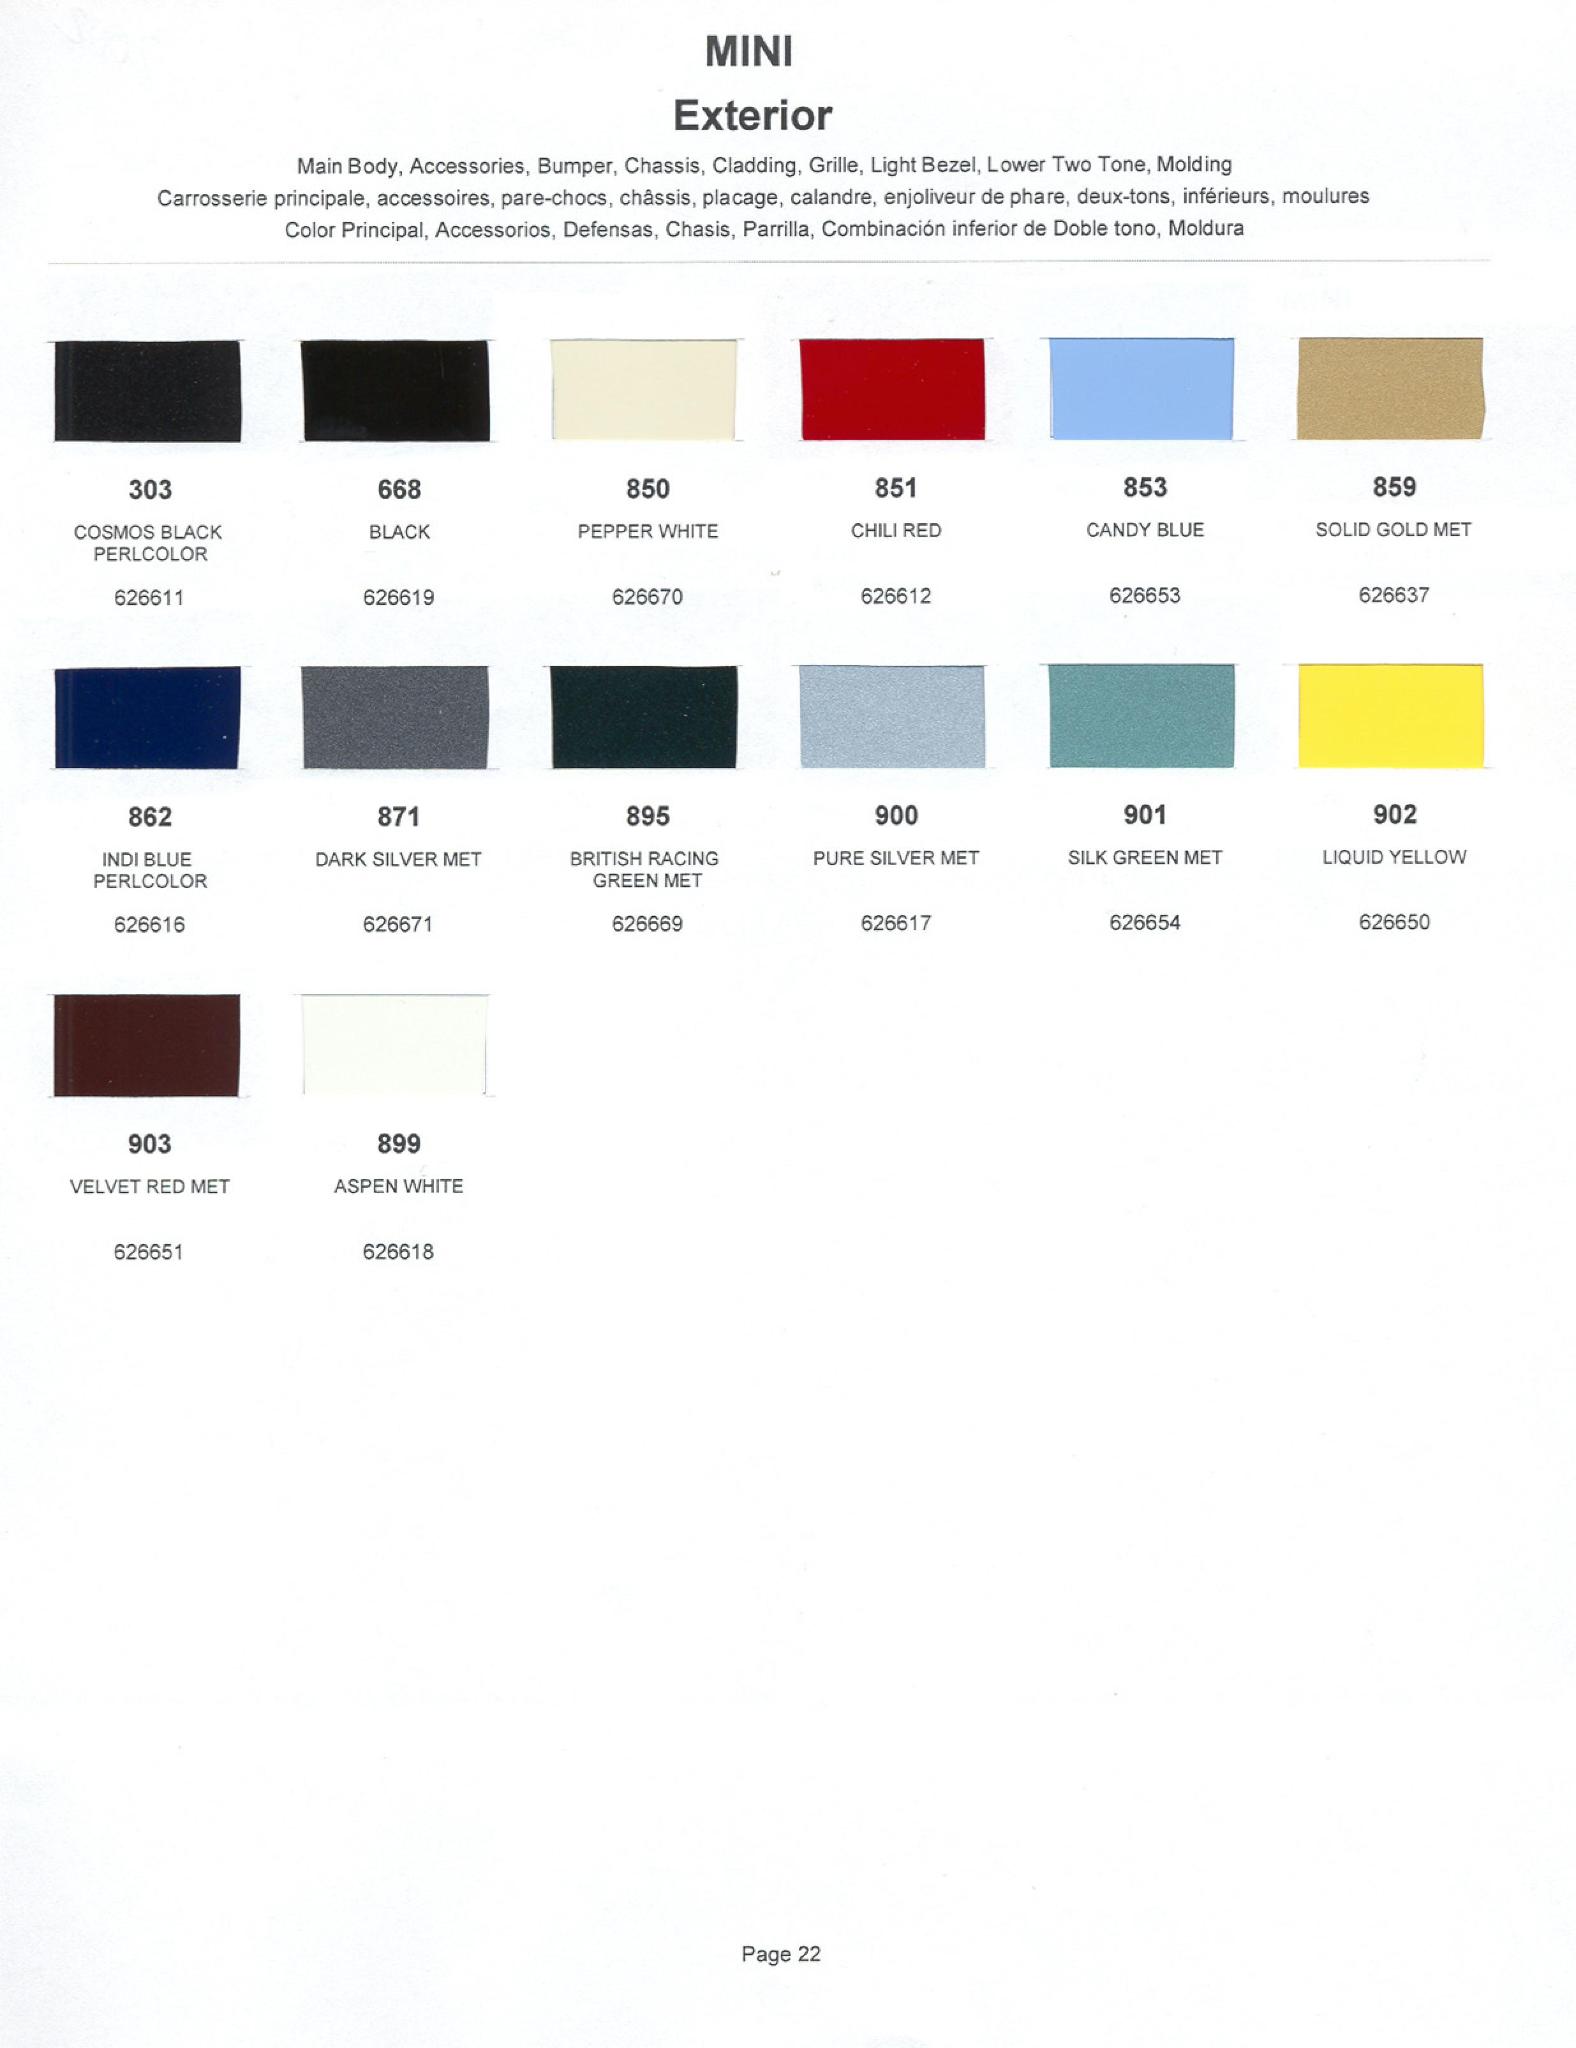 Paint Color examples with their exterior color code